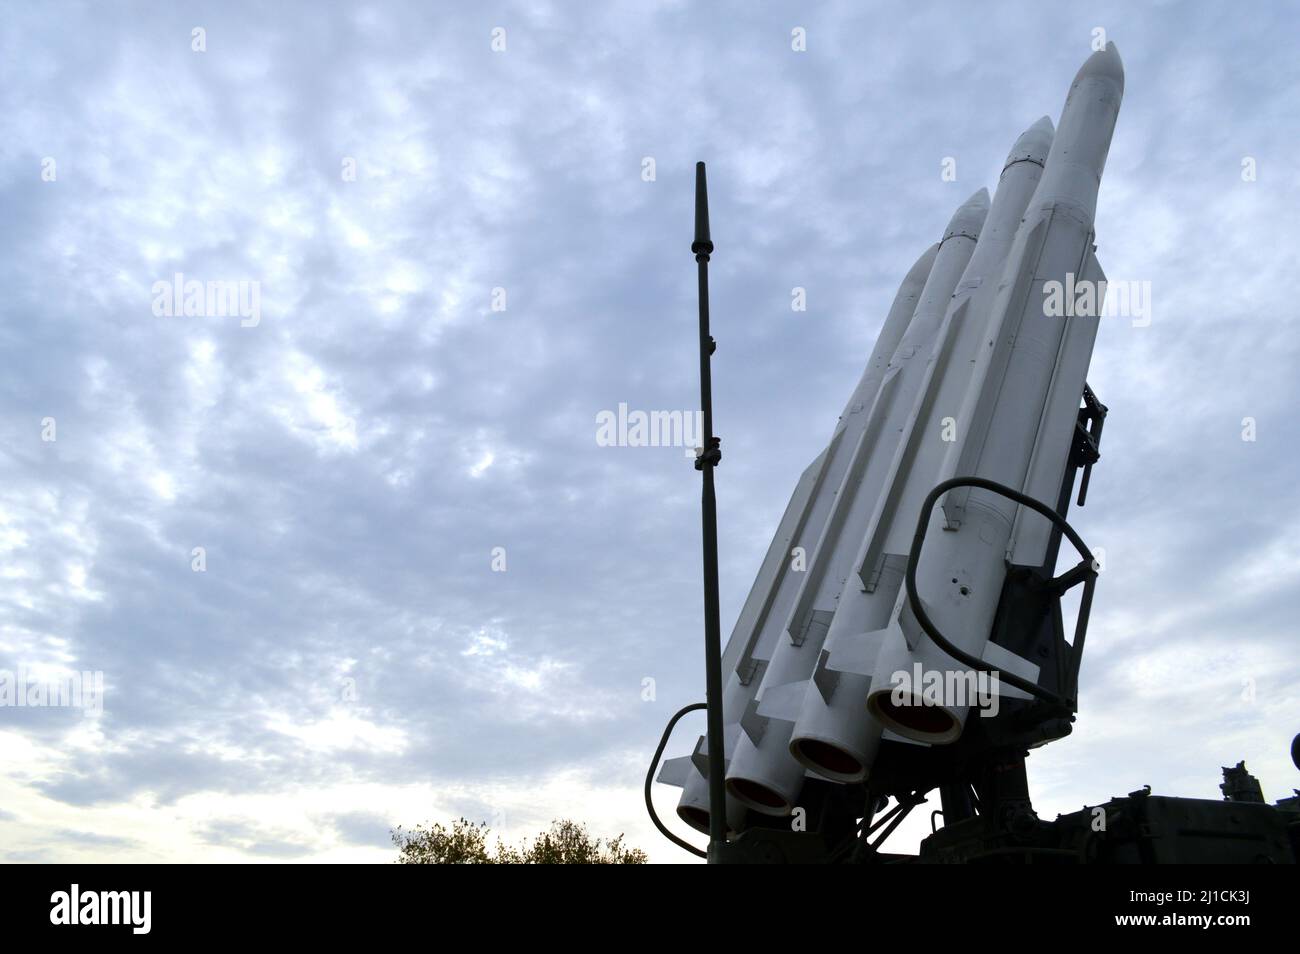 Ukrainian self-propelled military installation with missiles Stock Photo